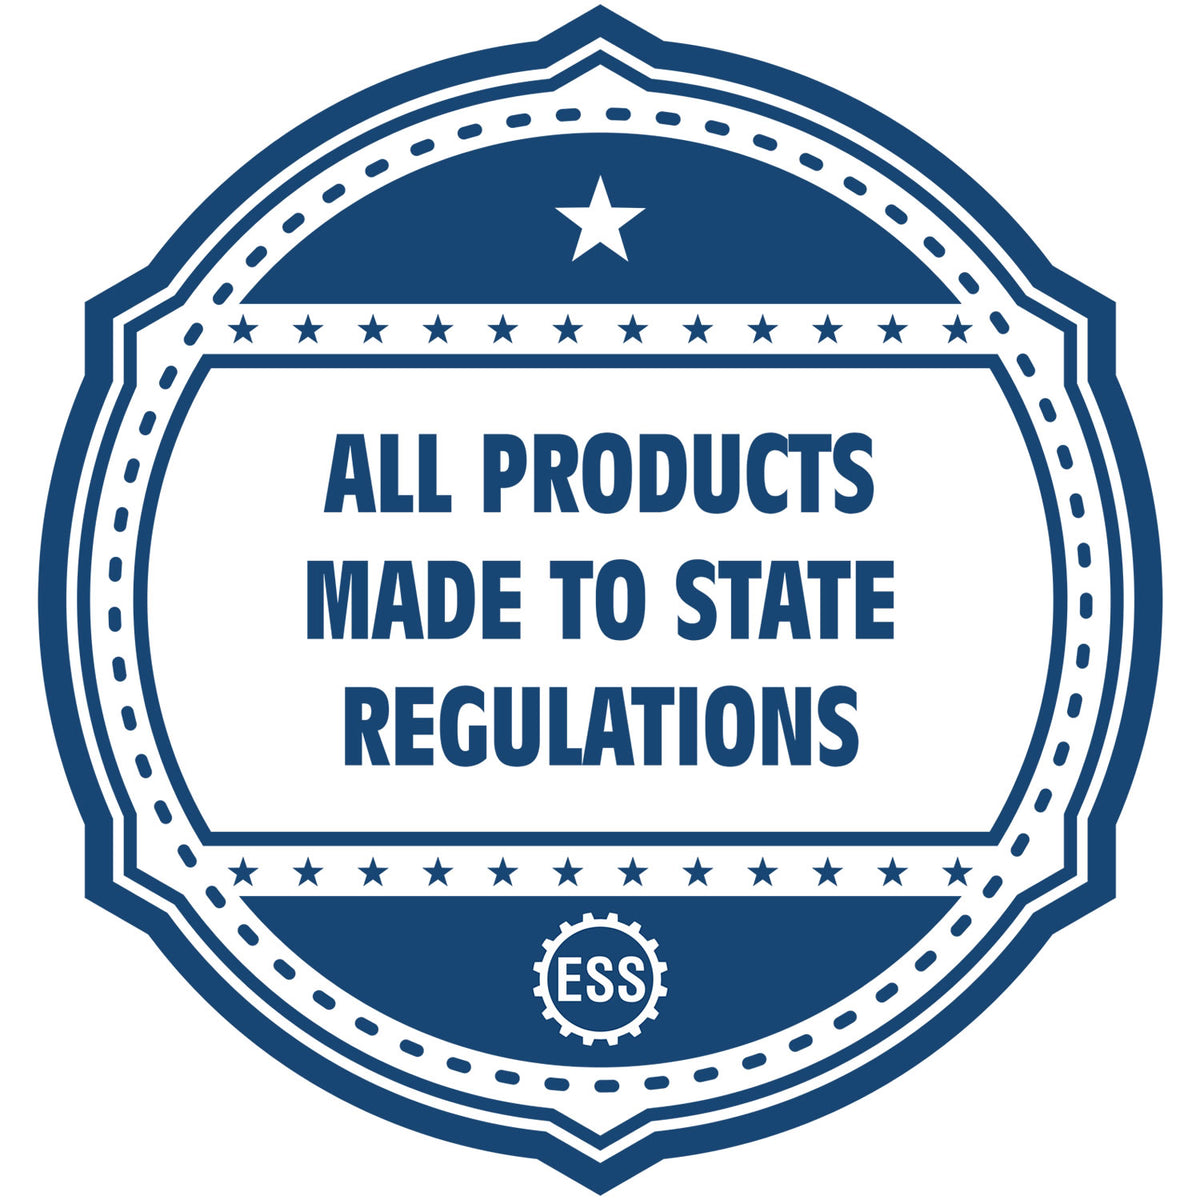 An icon or badge element for the MaxLight Premium Pre-Inked Iowa State Seal Notarial Stamp showing that this product is made in compliance with state regulations.